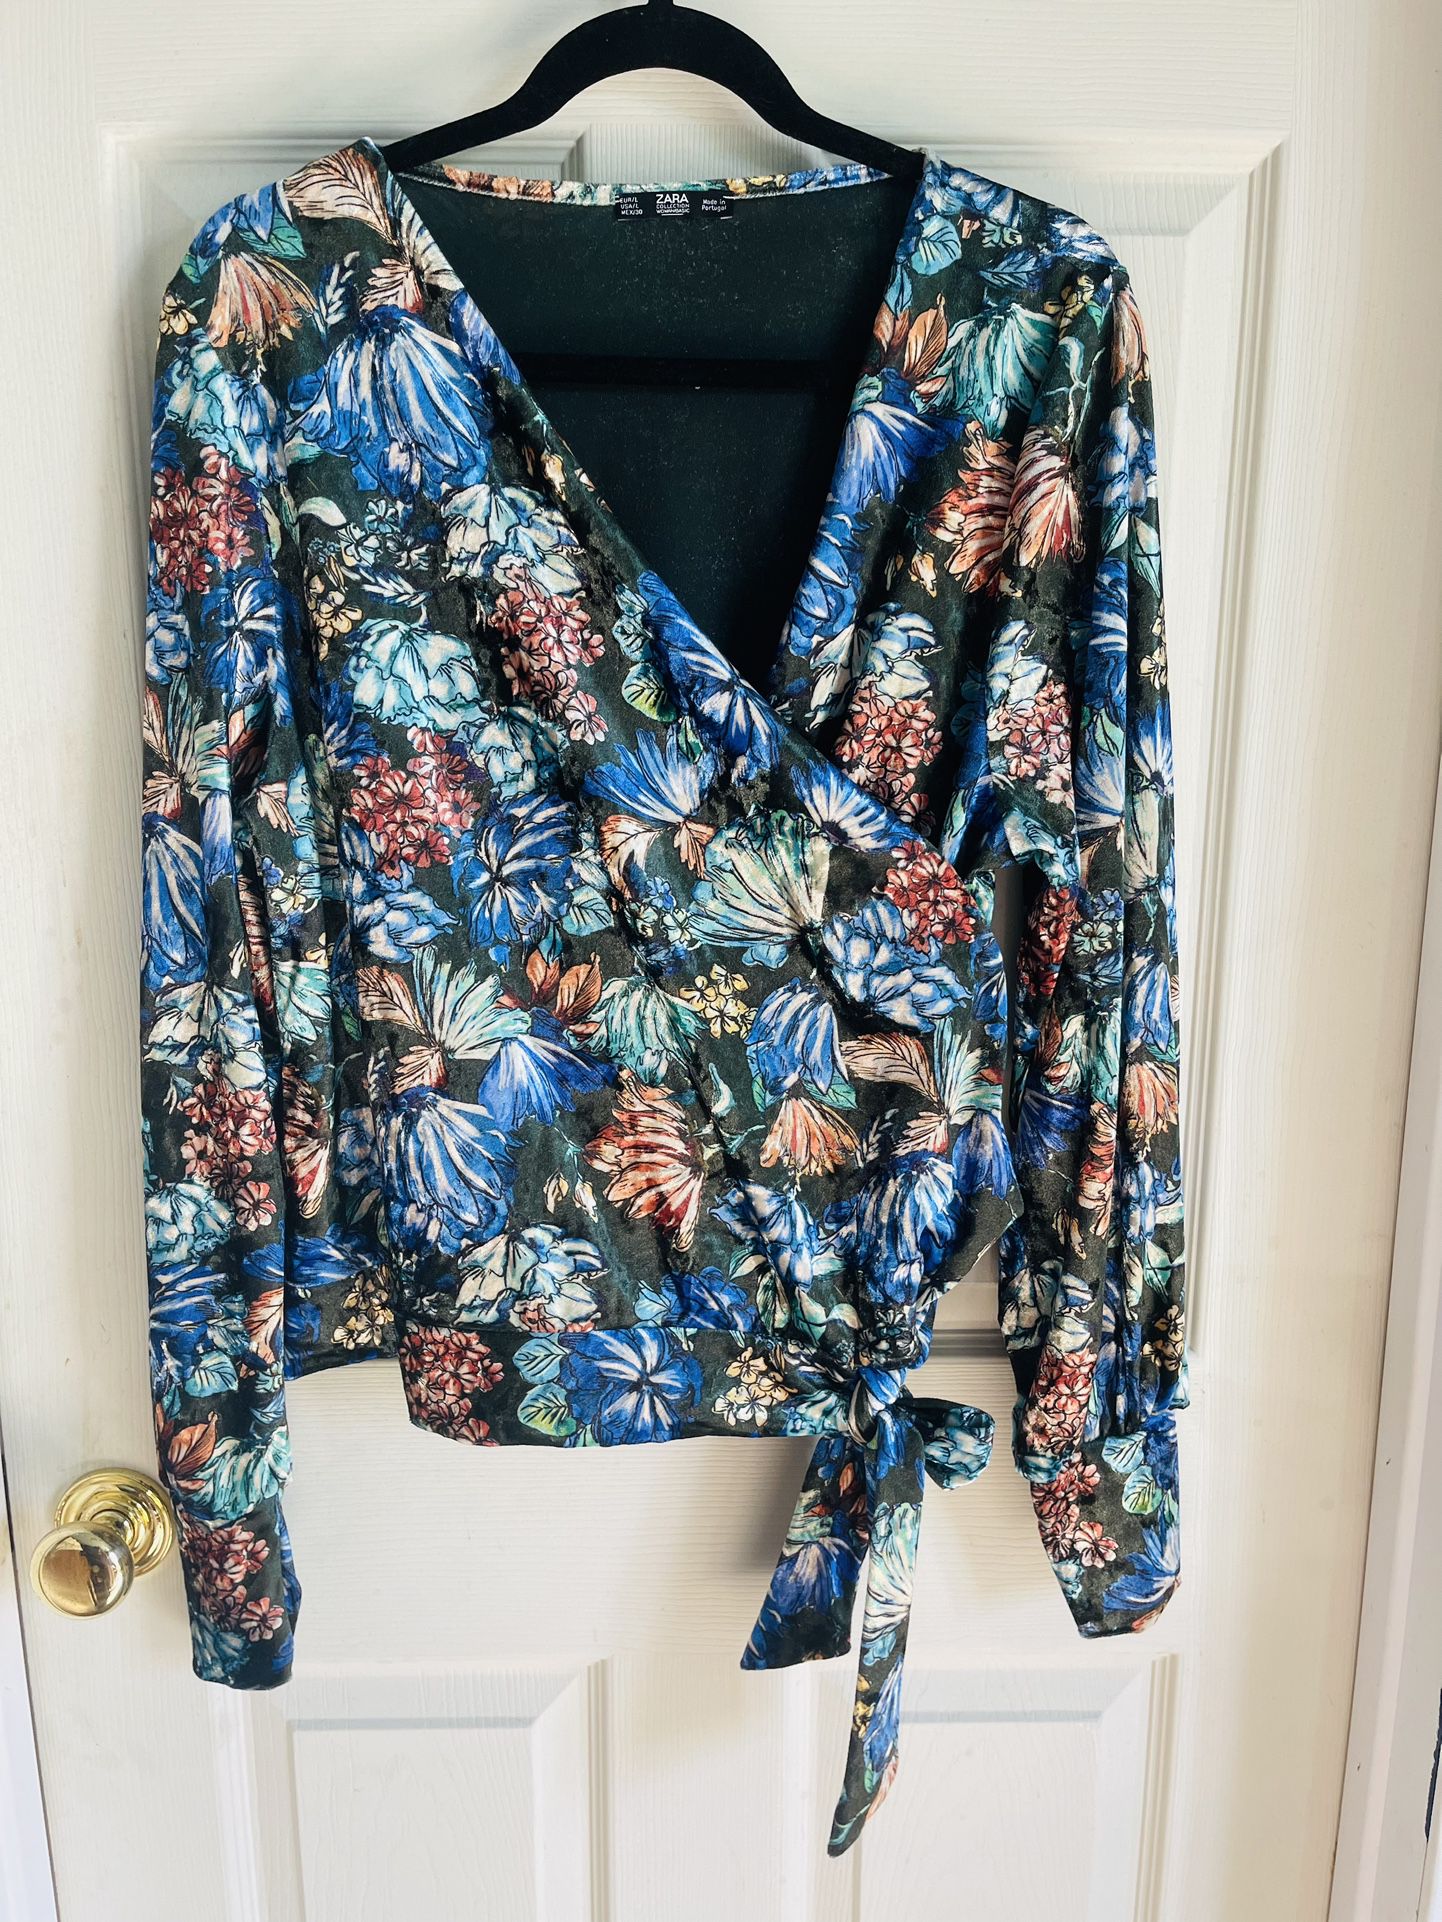 Zara Blue L size velvet floral cardigan lace-up top for senior comfort loose and breathable